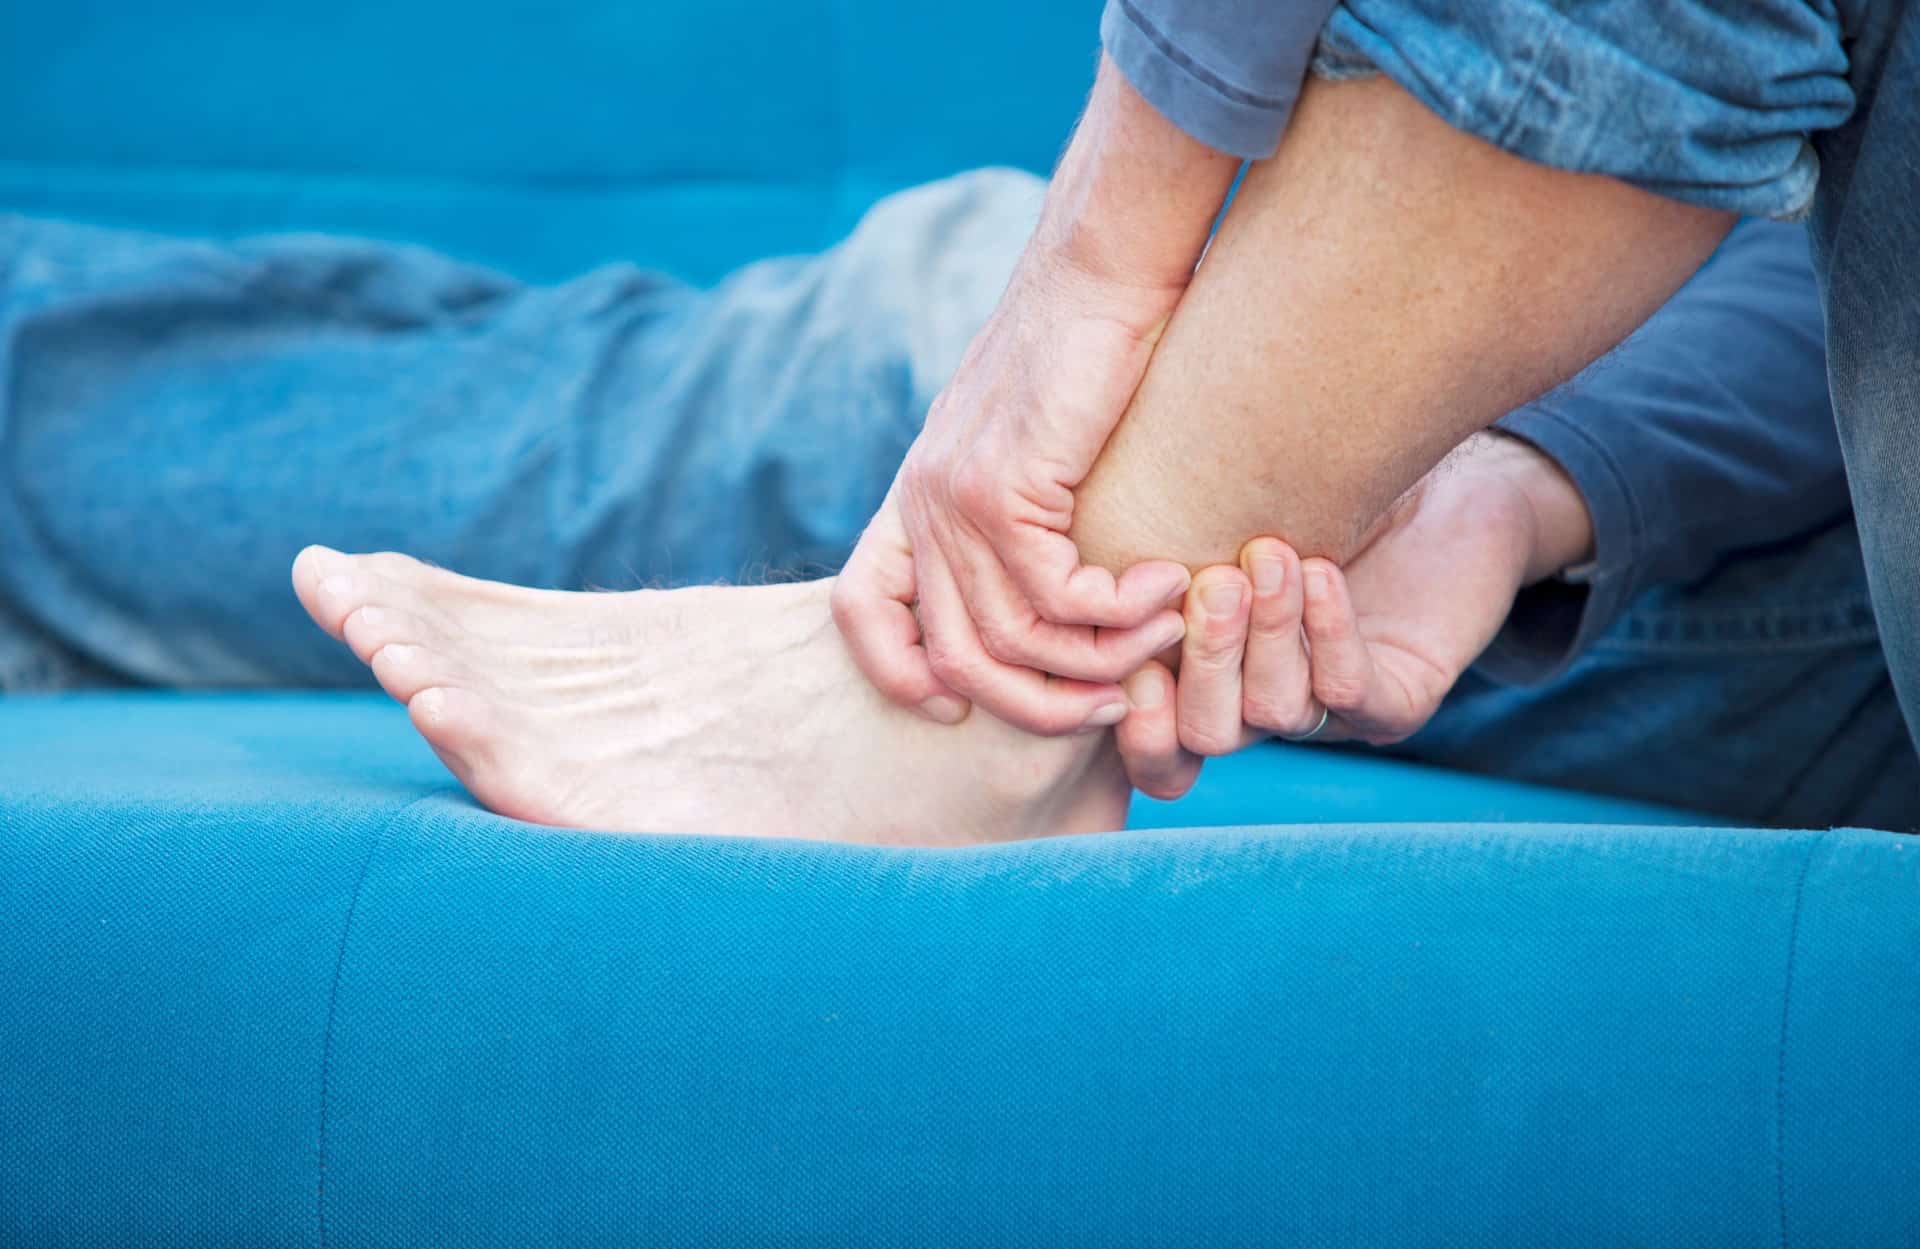 Common Causes Of Ankle Pain And 4 Simple Tips To Relieve It